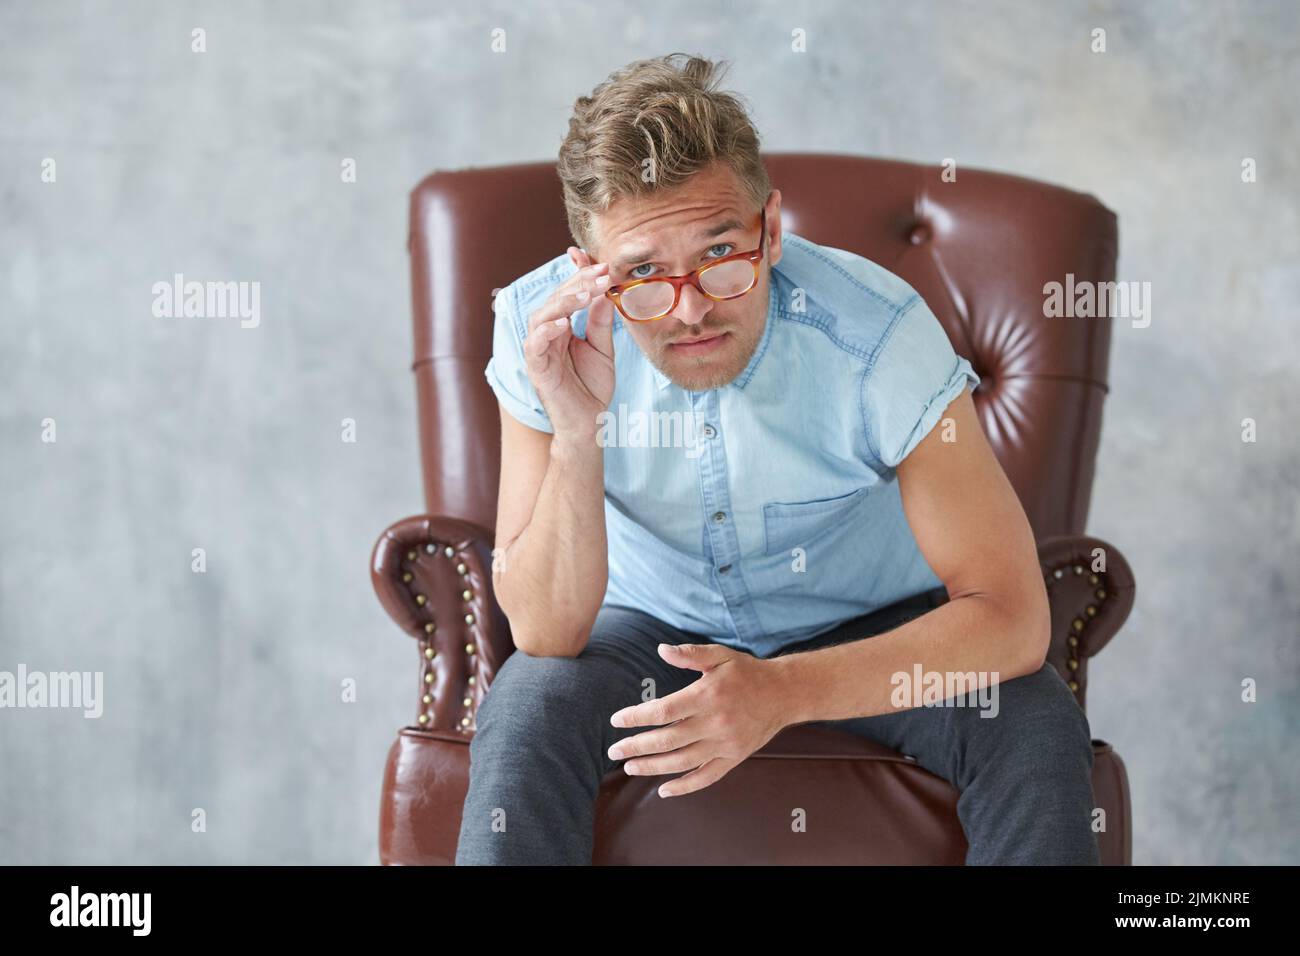 Portrait of a stylish intelligent man stares into the camera, small unshaven, charismatic, blue shirt, sitting on a brown leathe Stock Photo